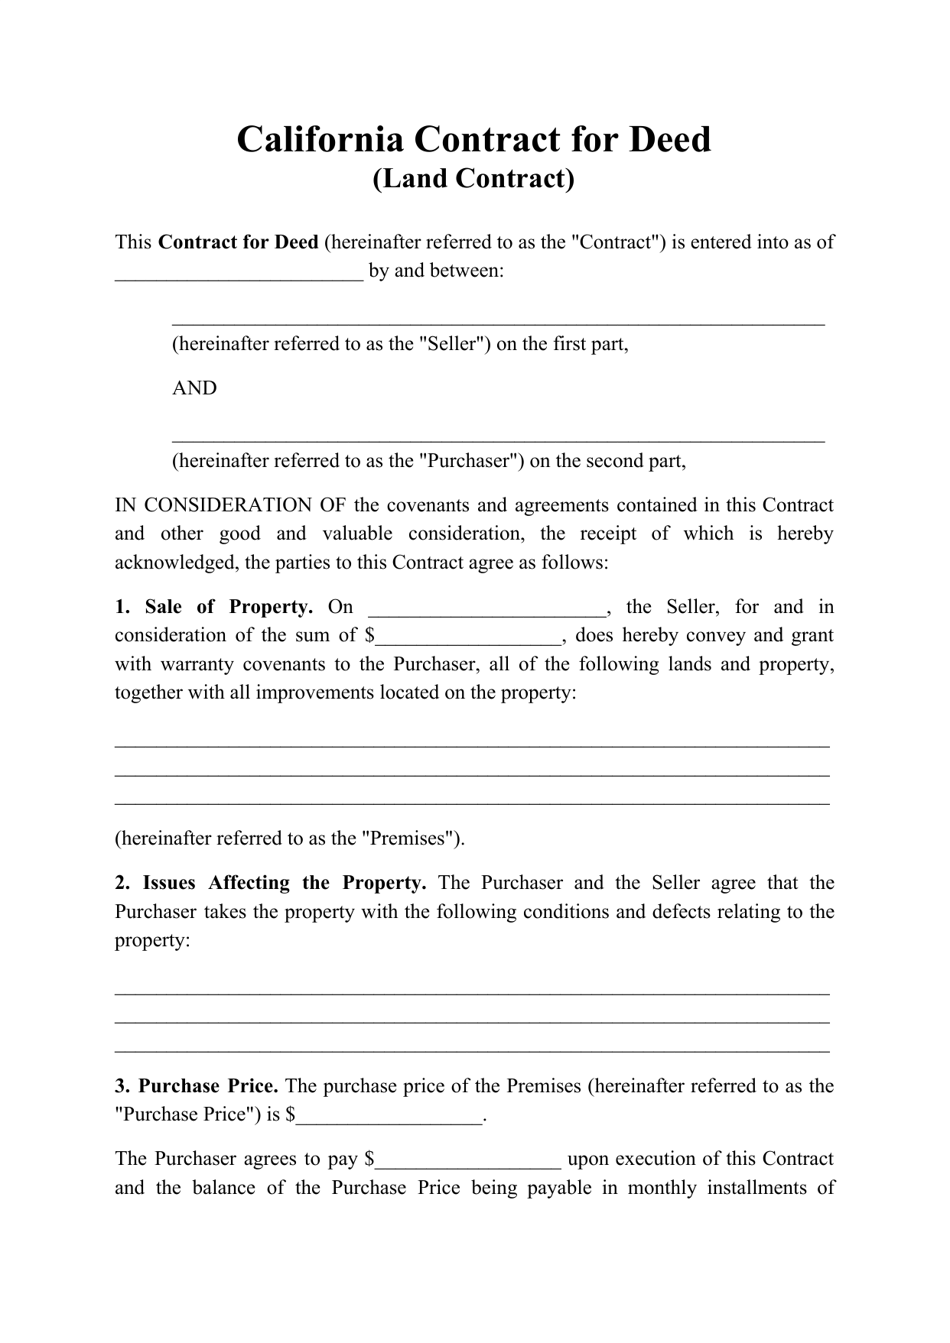 Contract for Deed (Land Contract) - California, Page 1